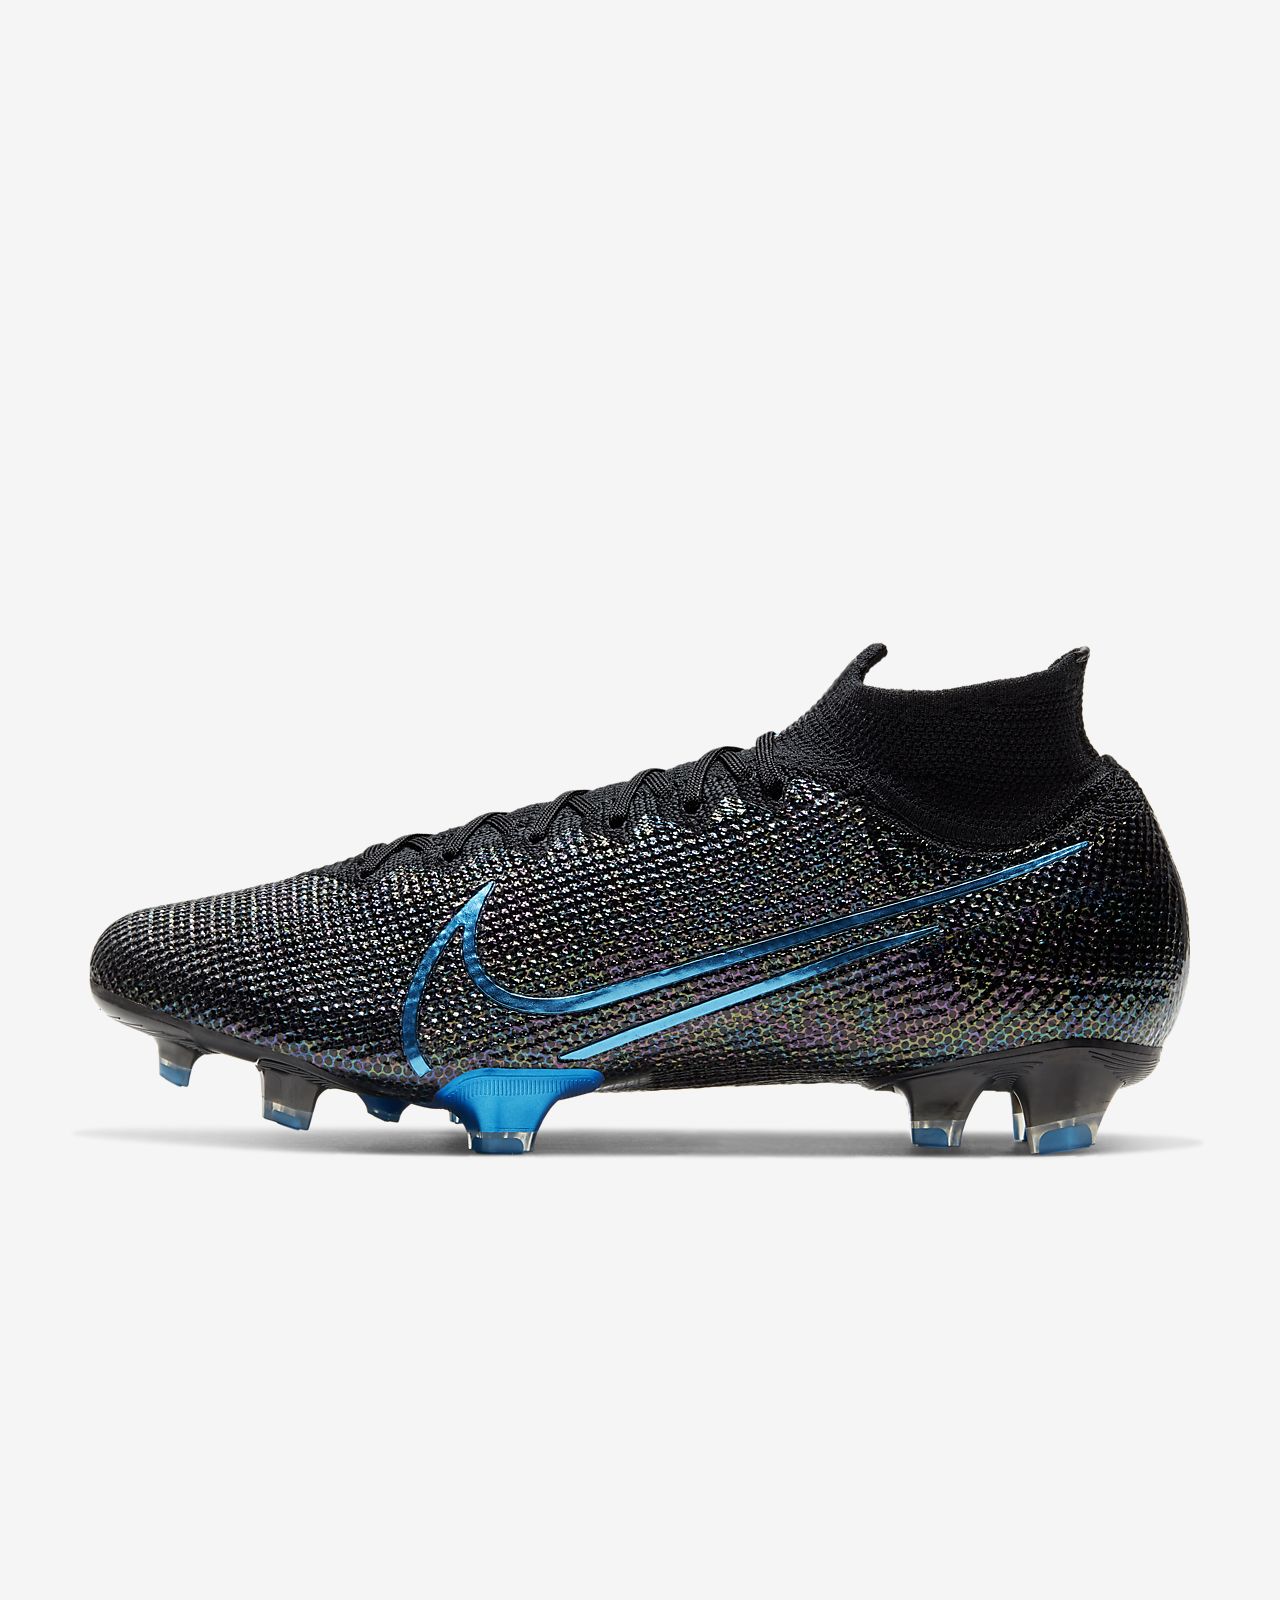 cleats for soccer near me